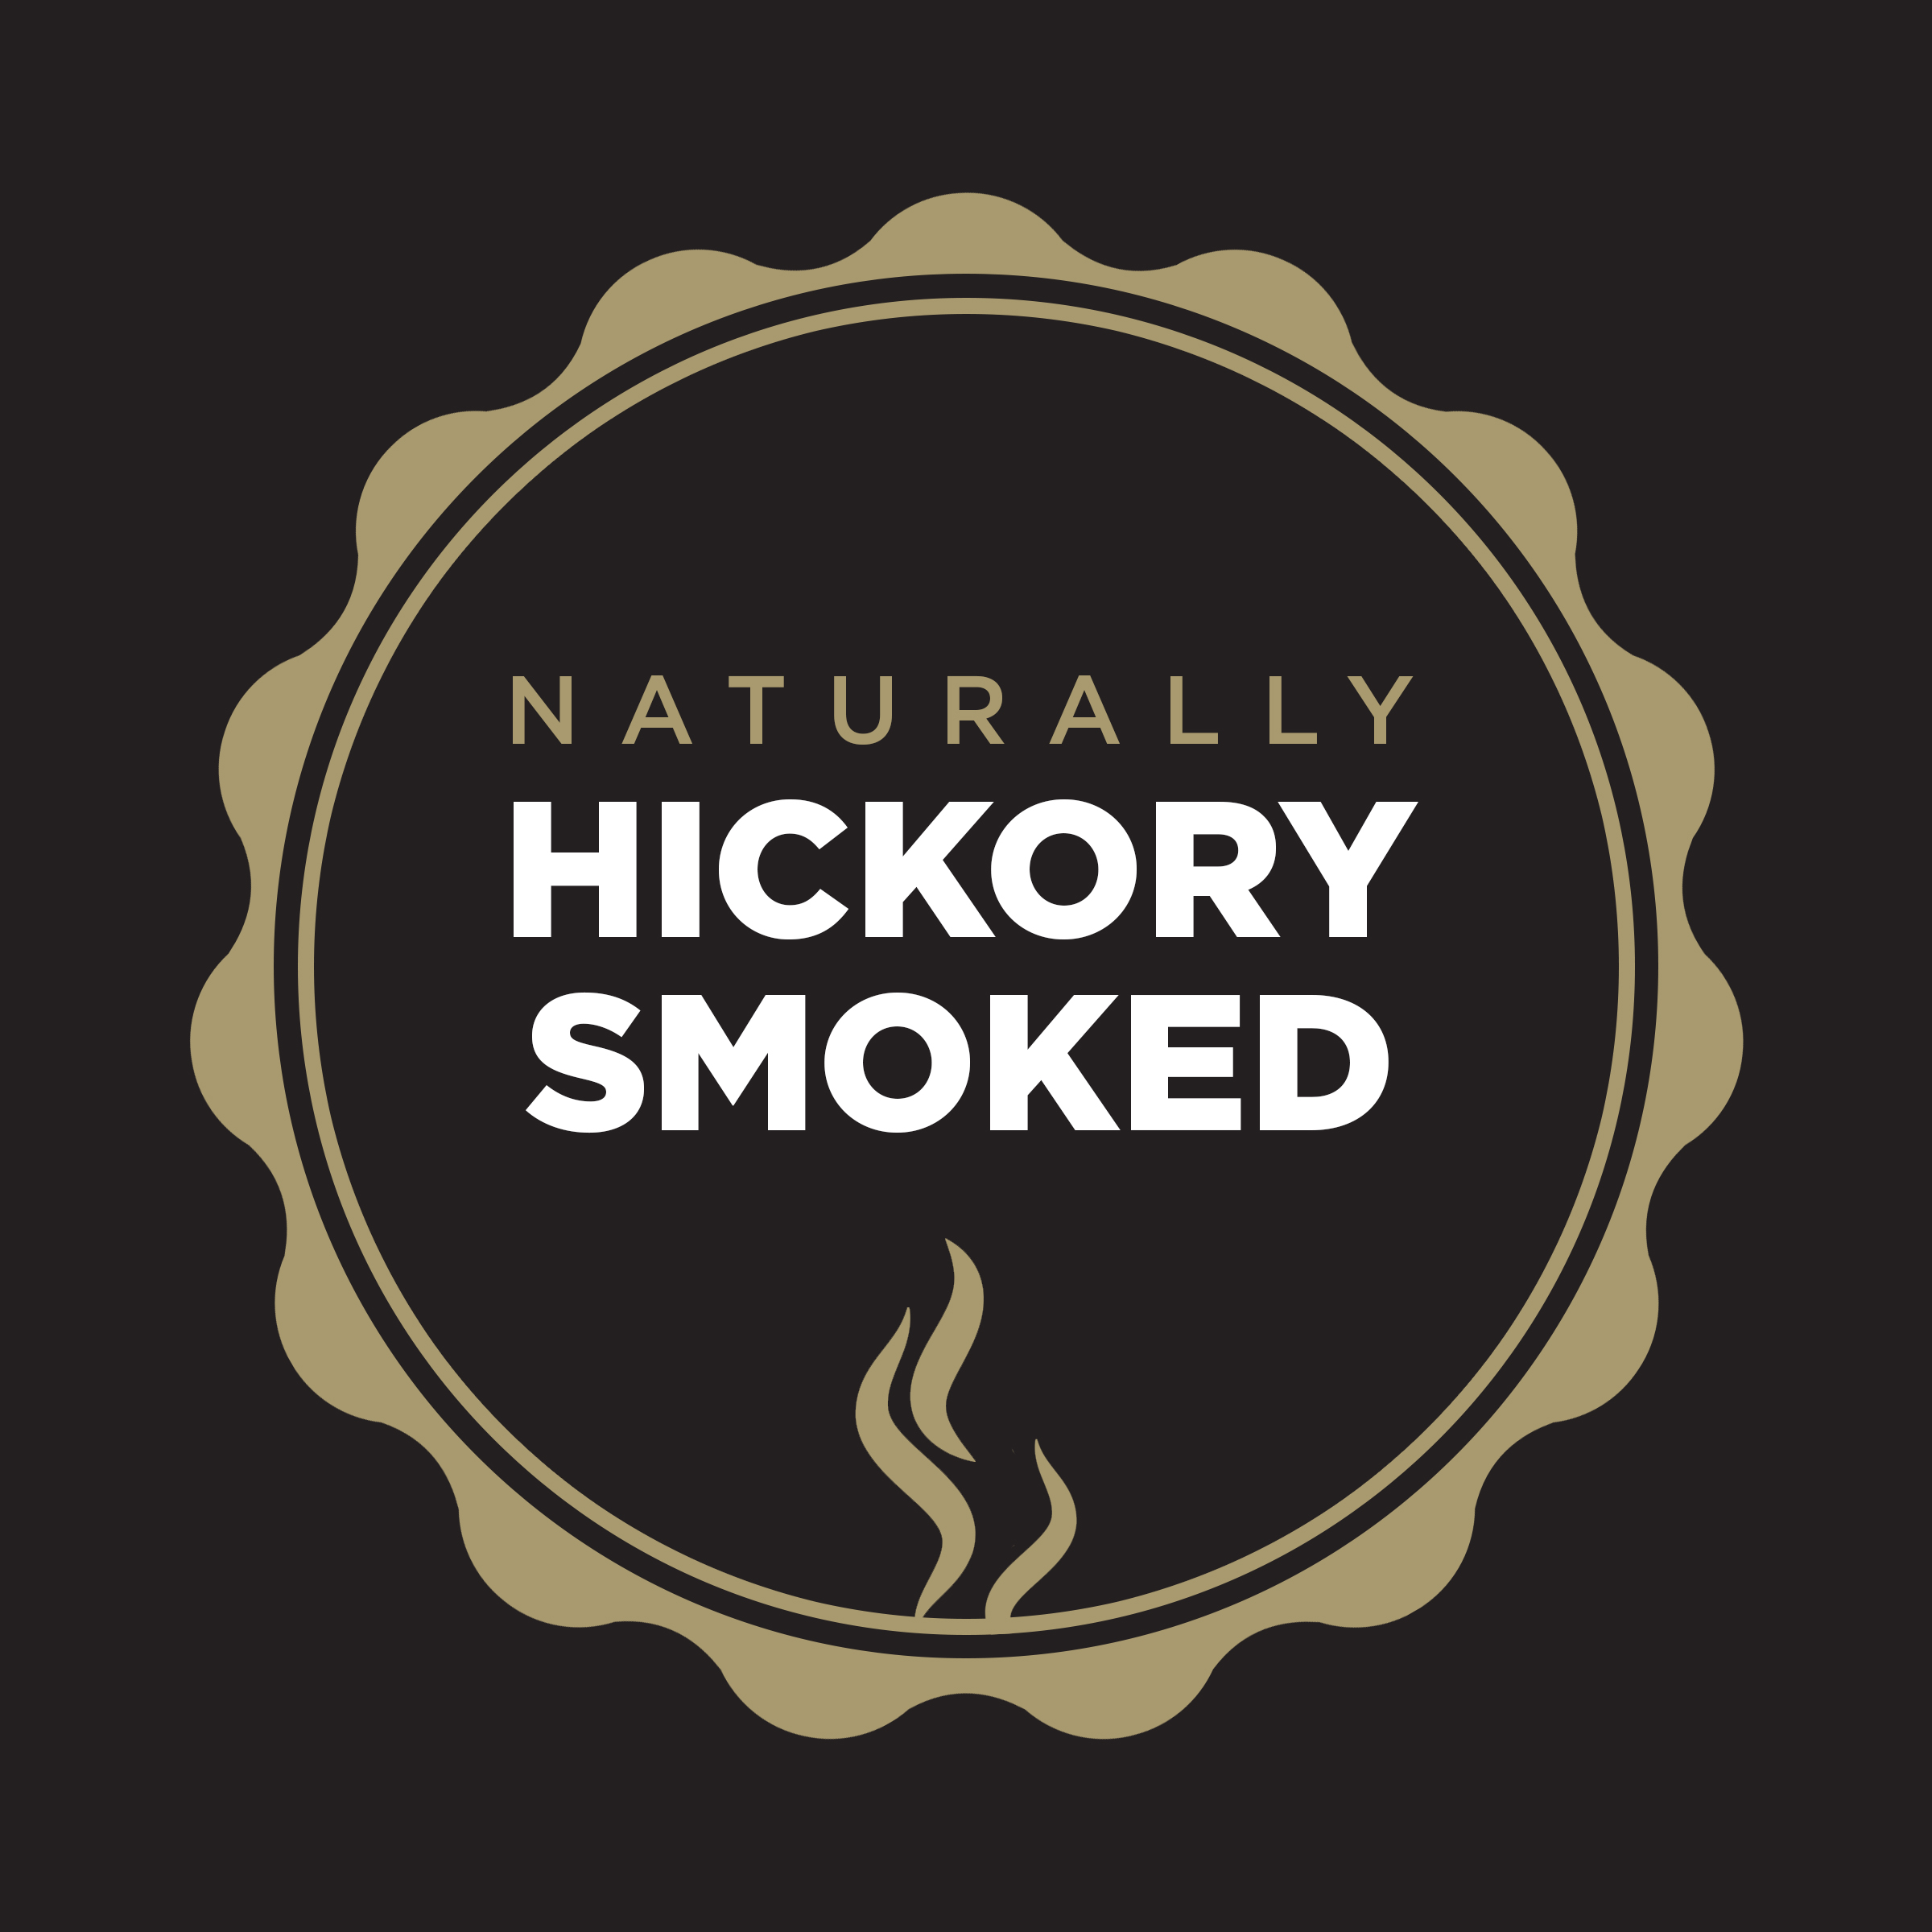 Smithfield All Natural Uncured Hickory Smoked Bacon, 12 oz - image 2 of 9